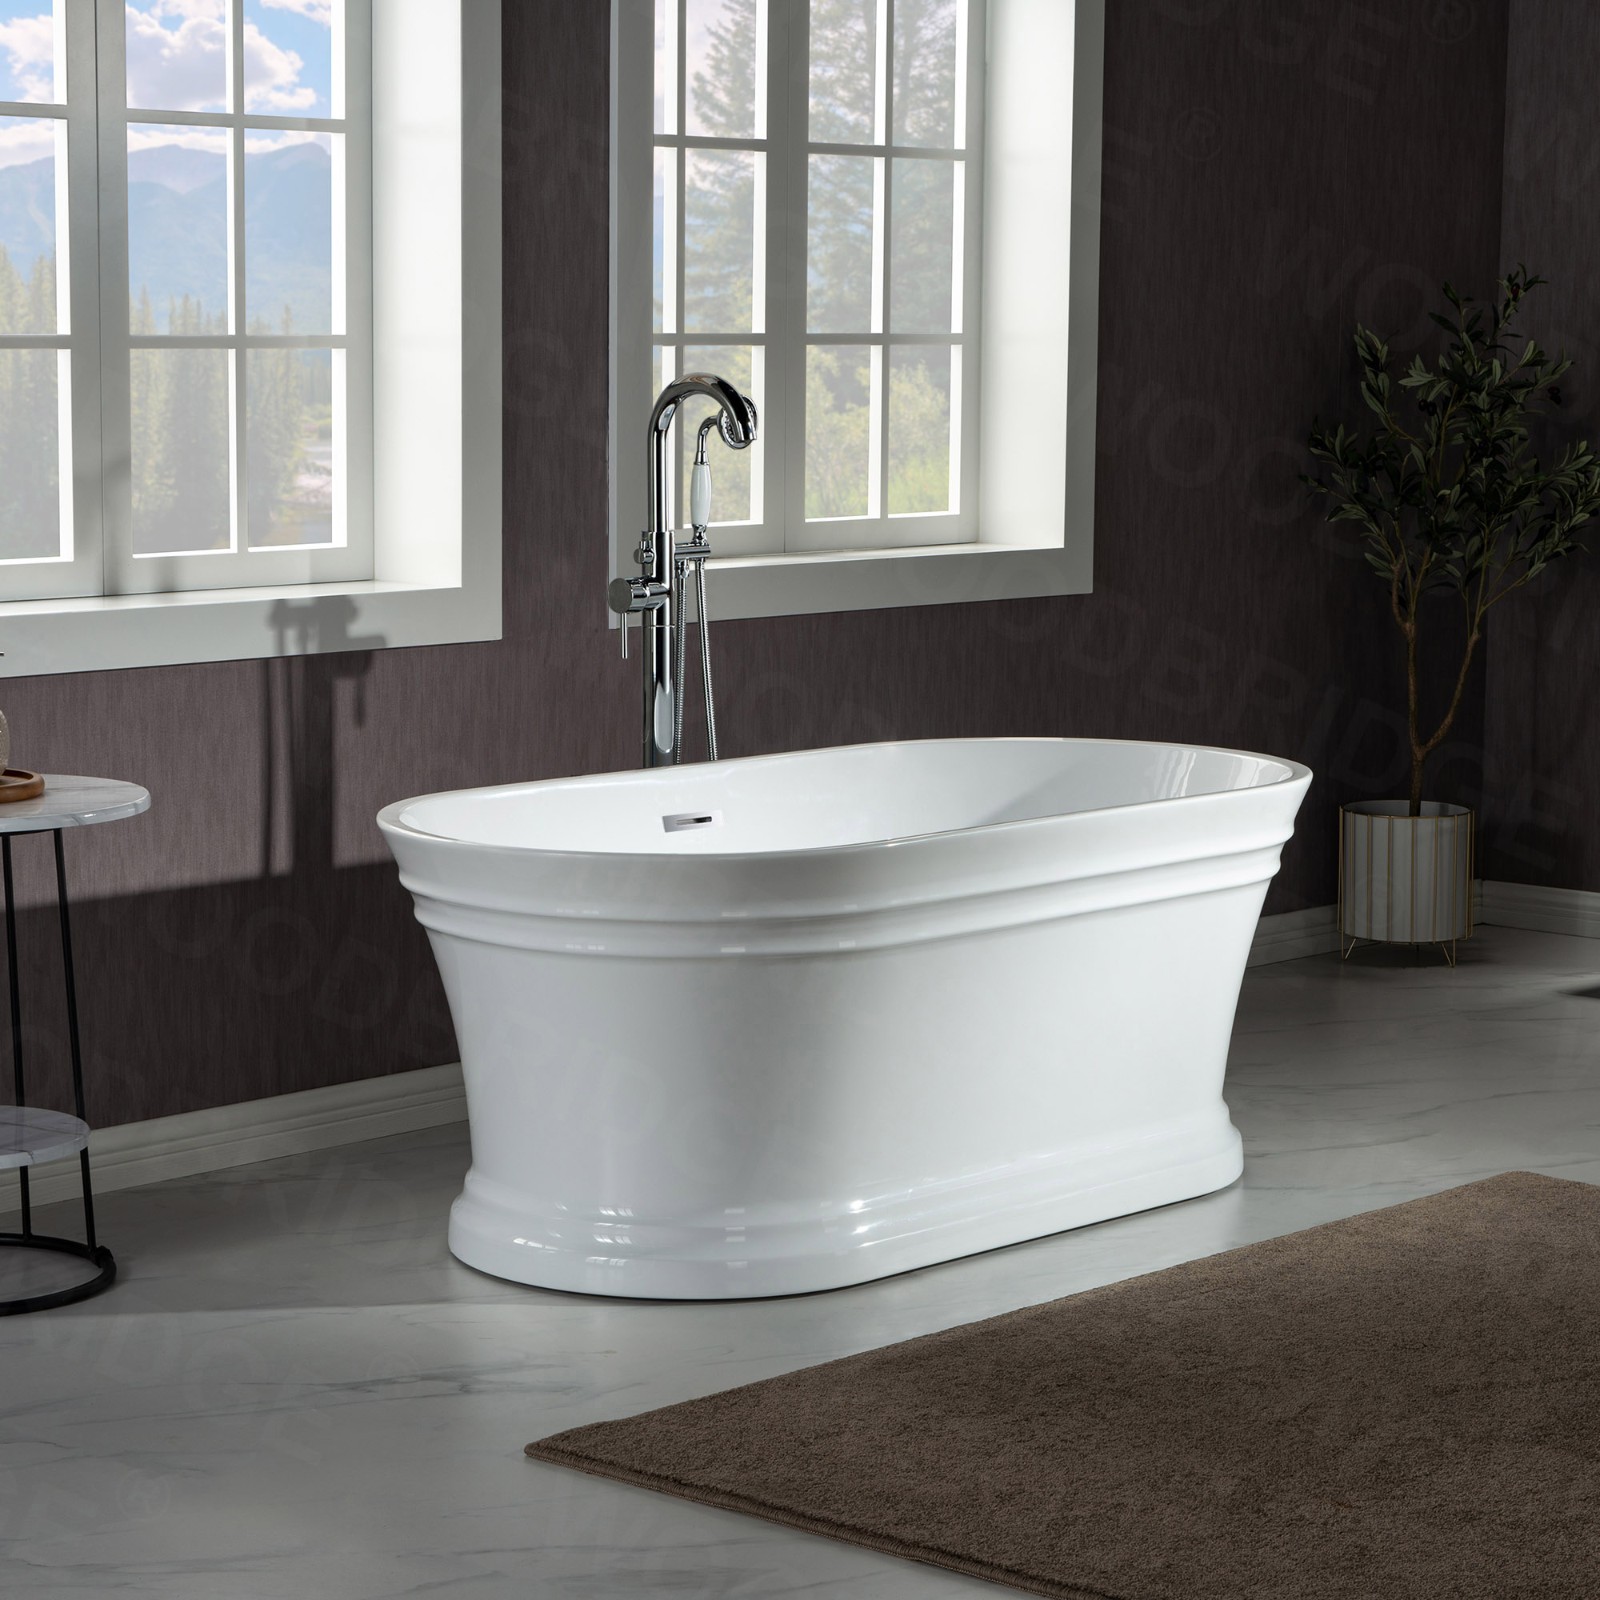  WOODBRIDGE 59 in. Freestanding Double Ended Acrylic Soaking Bathtub with Center Drain Assembly and Overflow, BTA1536/B1536, Glossy White_7838